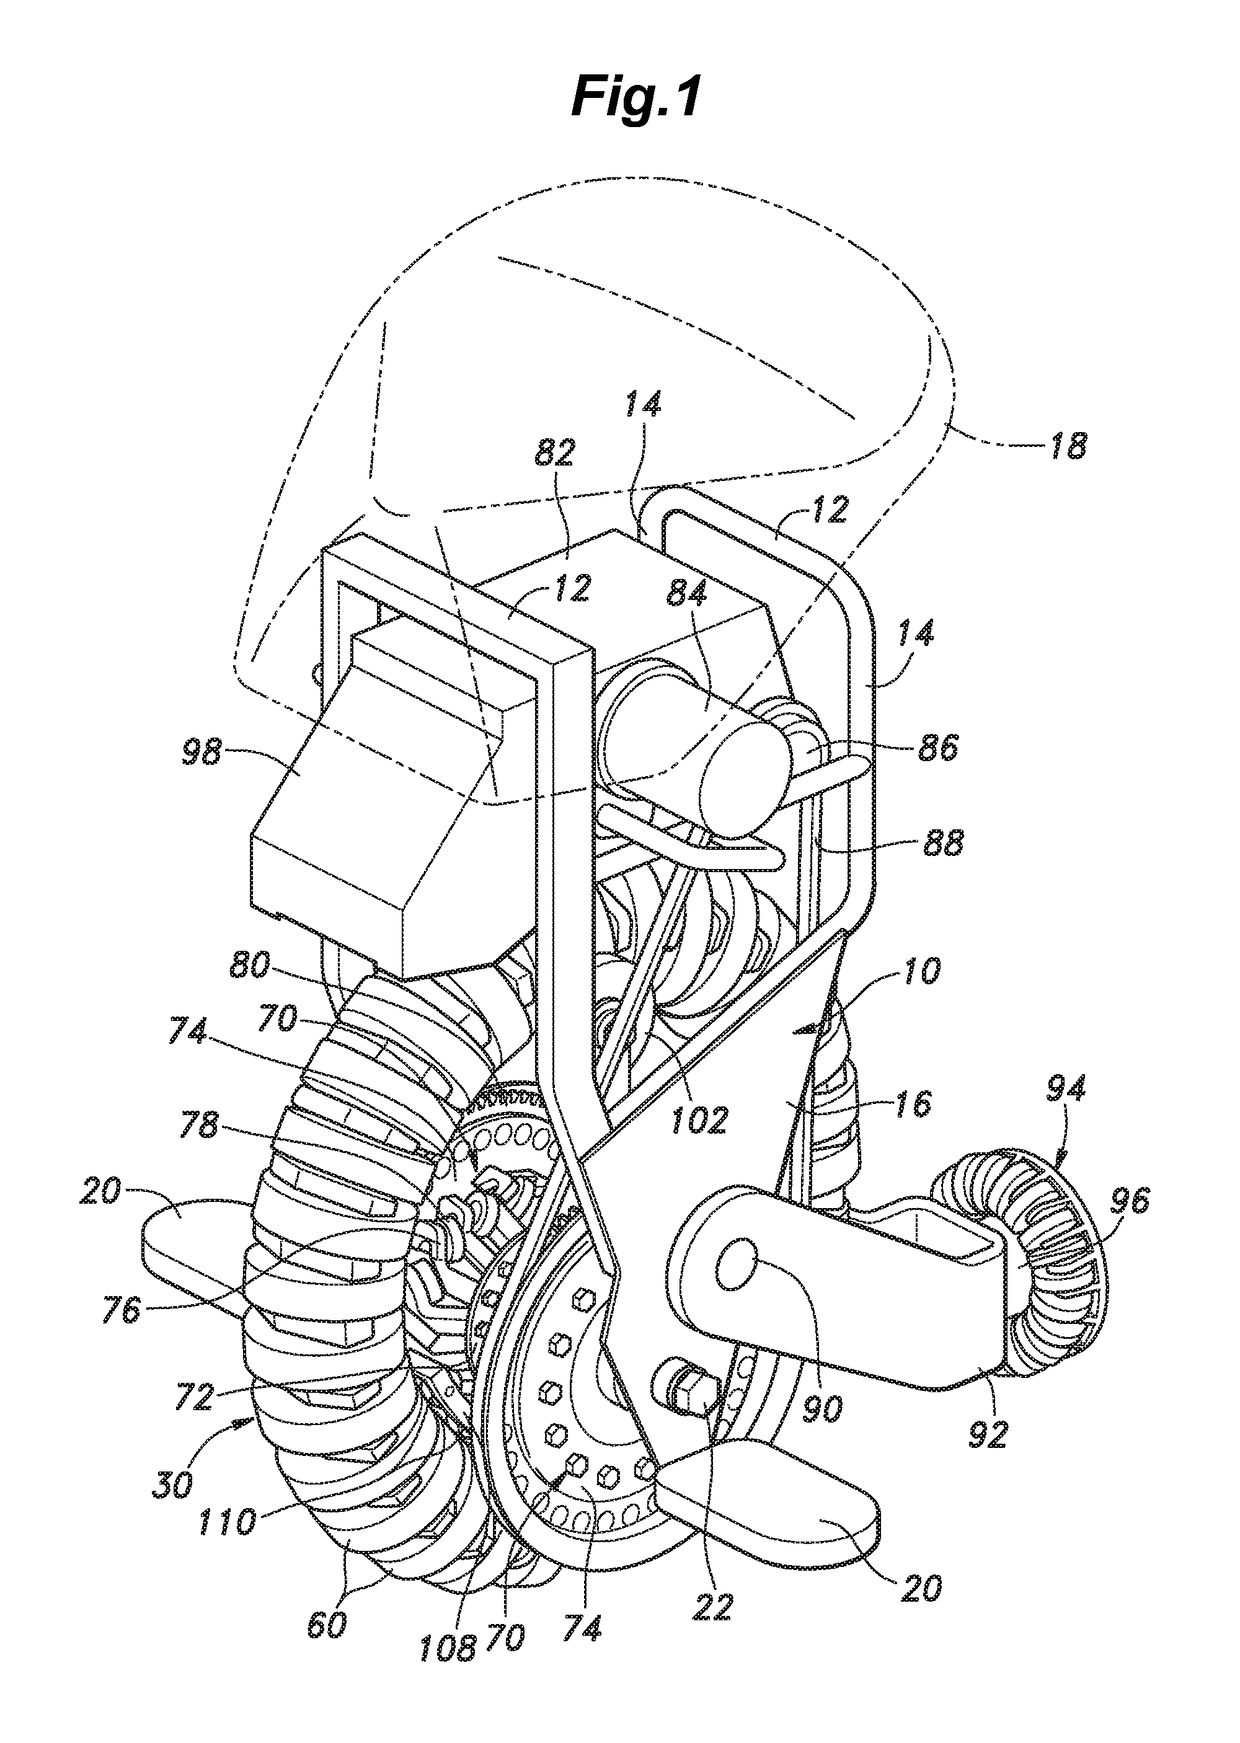 Omni-wheel, frictional propulsion device and omni-directional vehicle